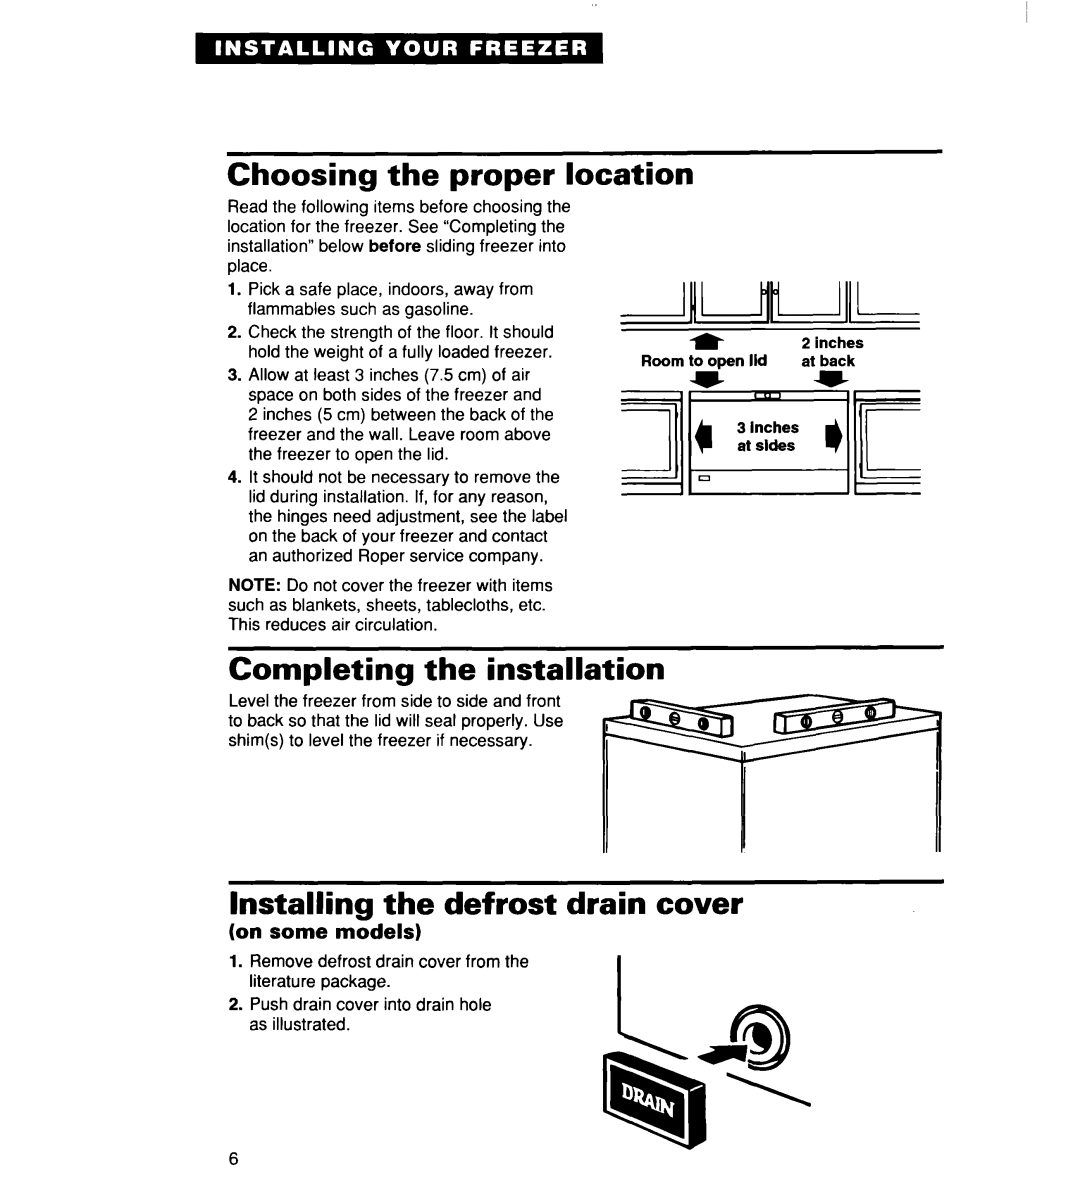 Whirlpool 2165306 warranty Choosing the proper location, Completing the installation, Installing the defrost drain cover 